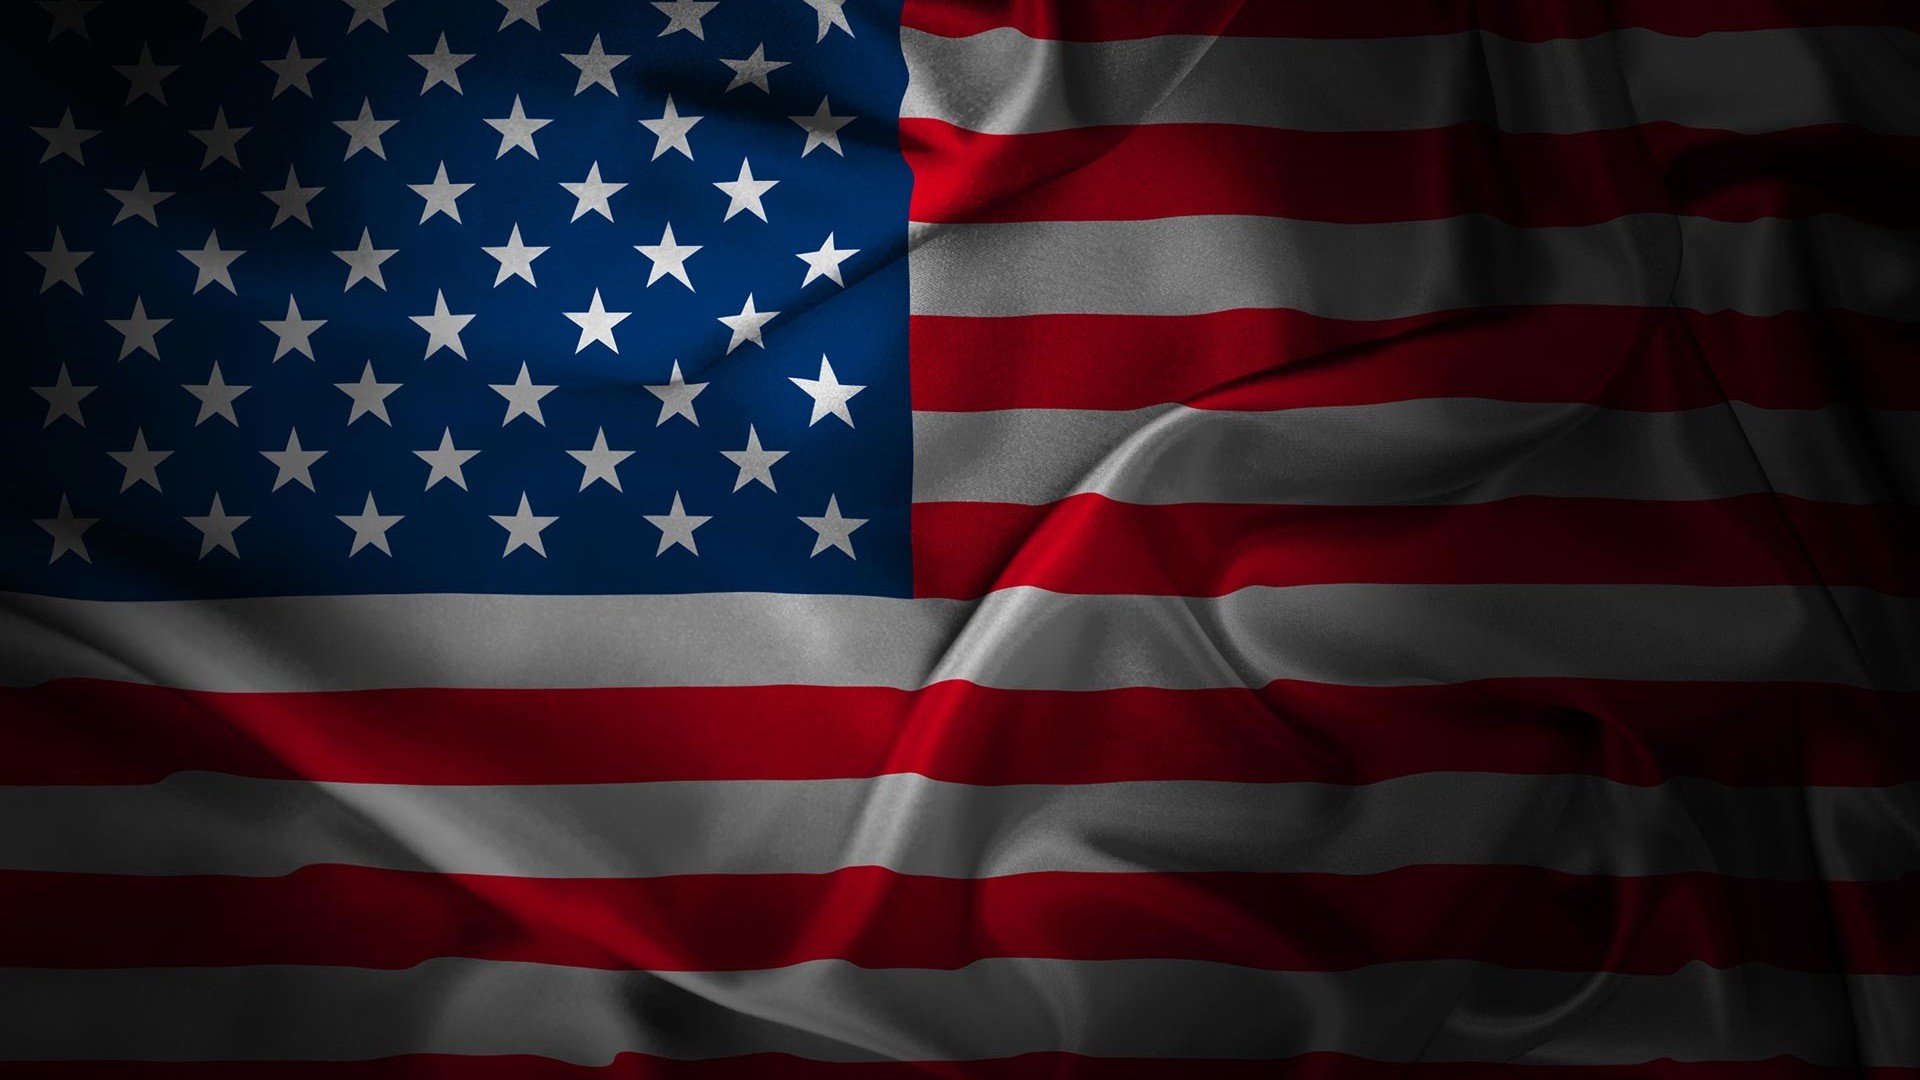 HD American Flag Backgrounds With high-resolution 1920X1080 pixel. You can use this wallpaper for your Windows and Mac OS computers as well as your Android and iPhone smartphones